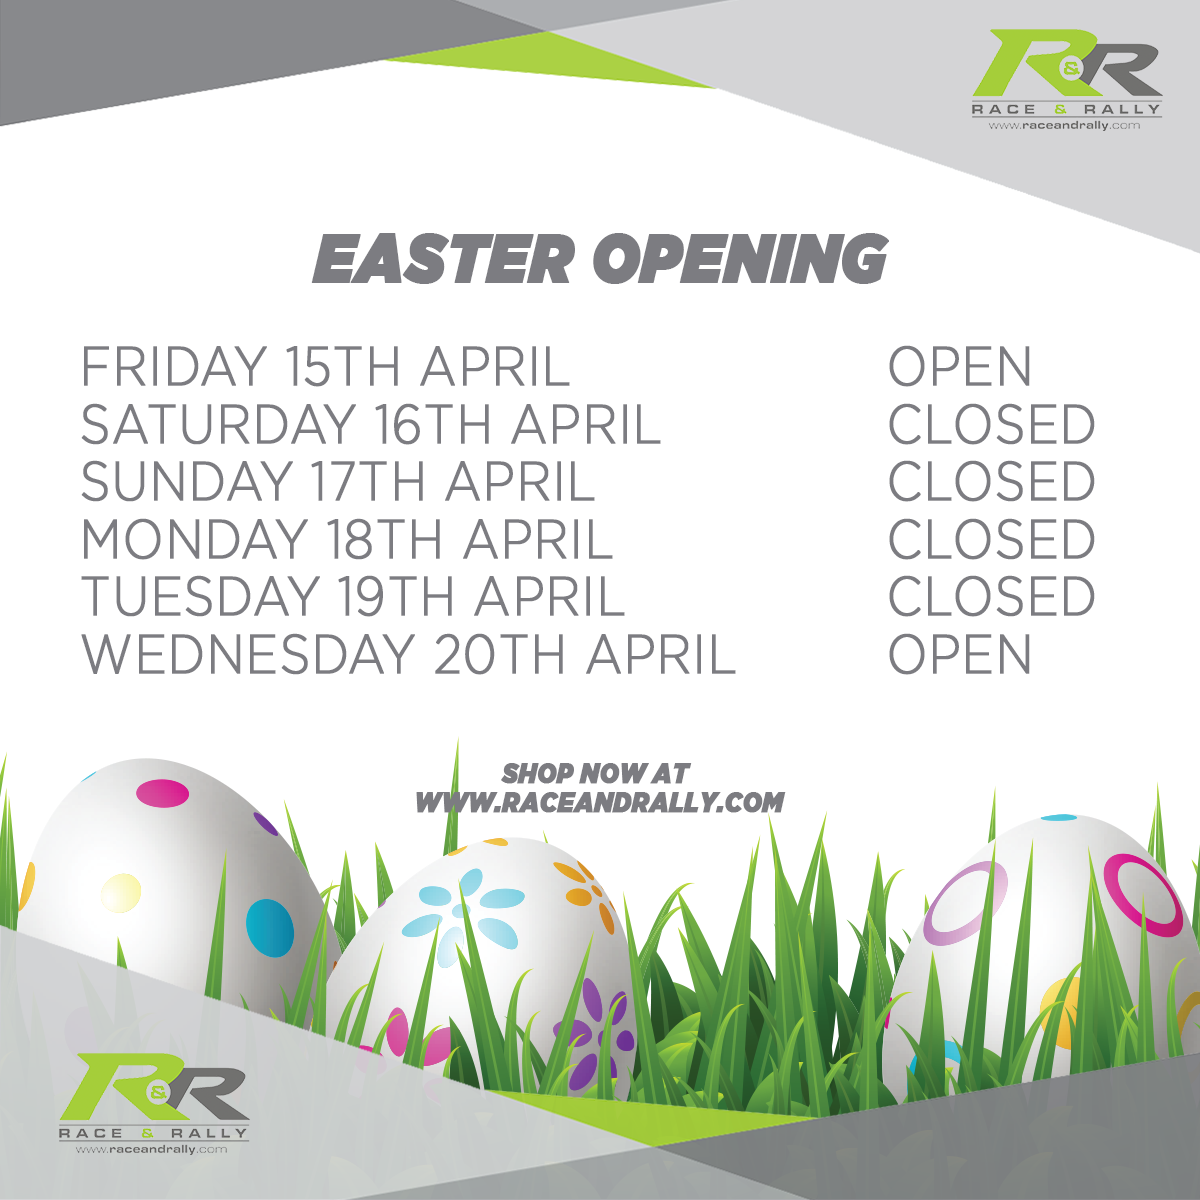 Easter opening